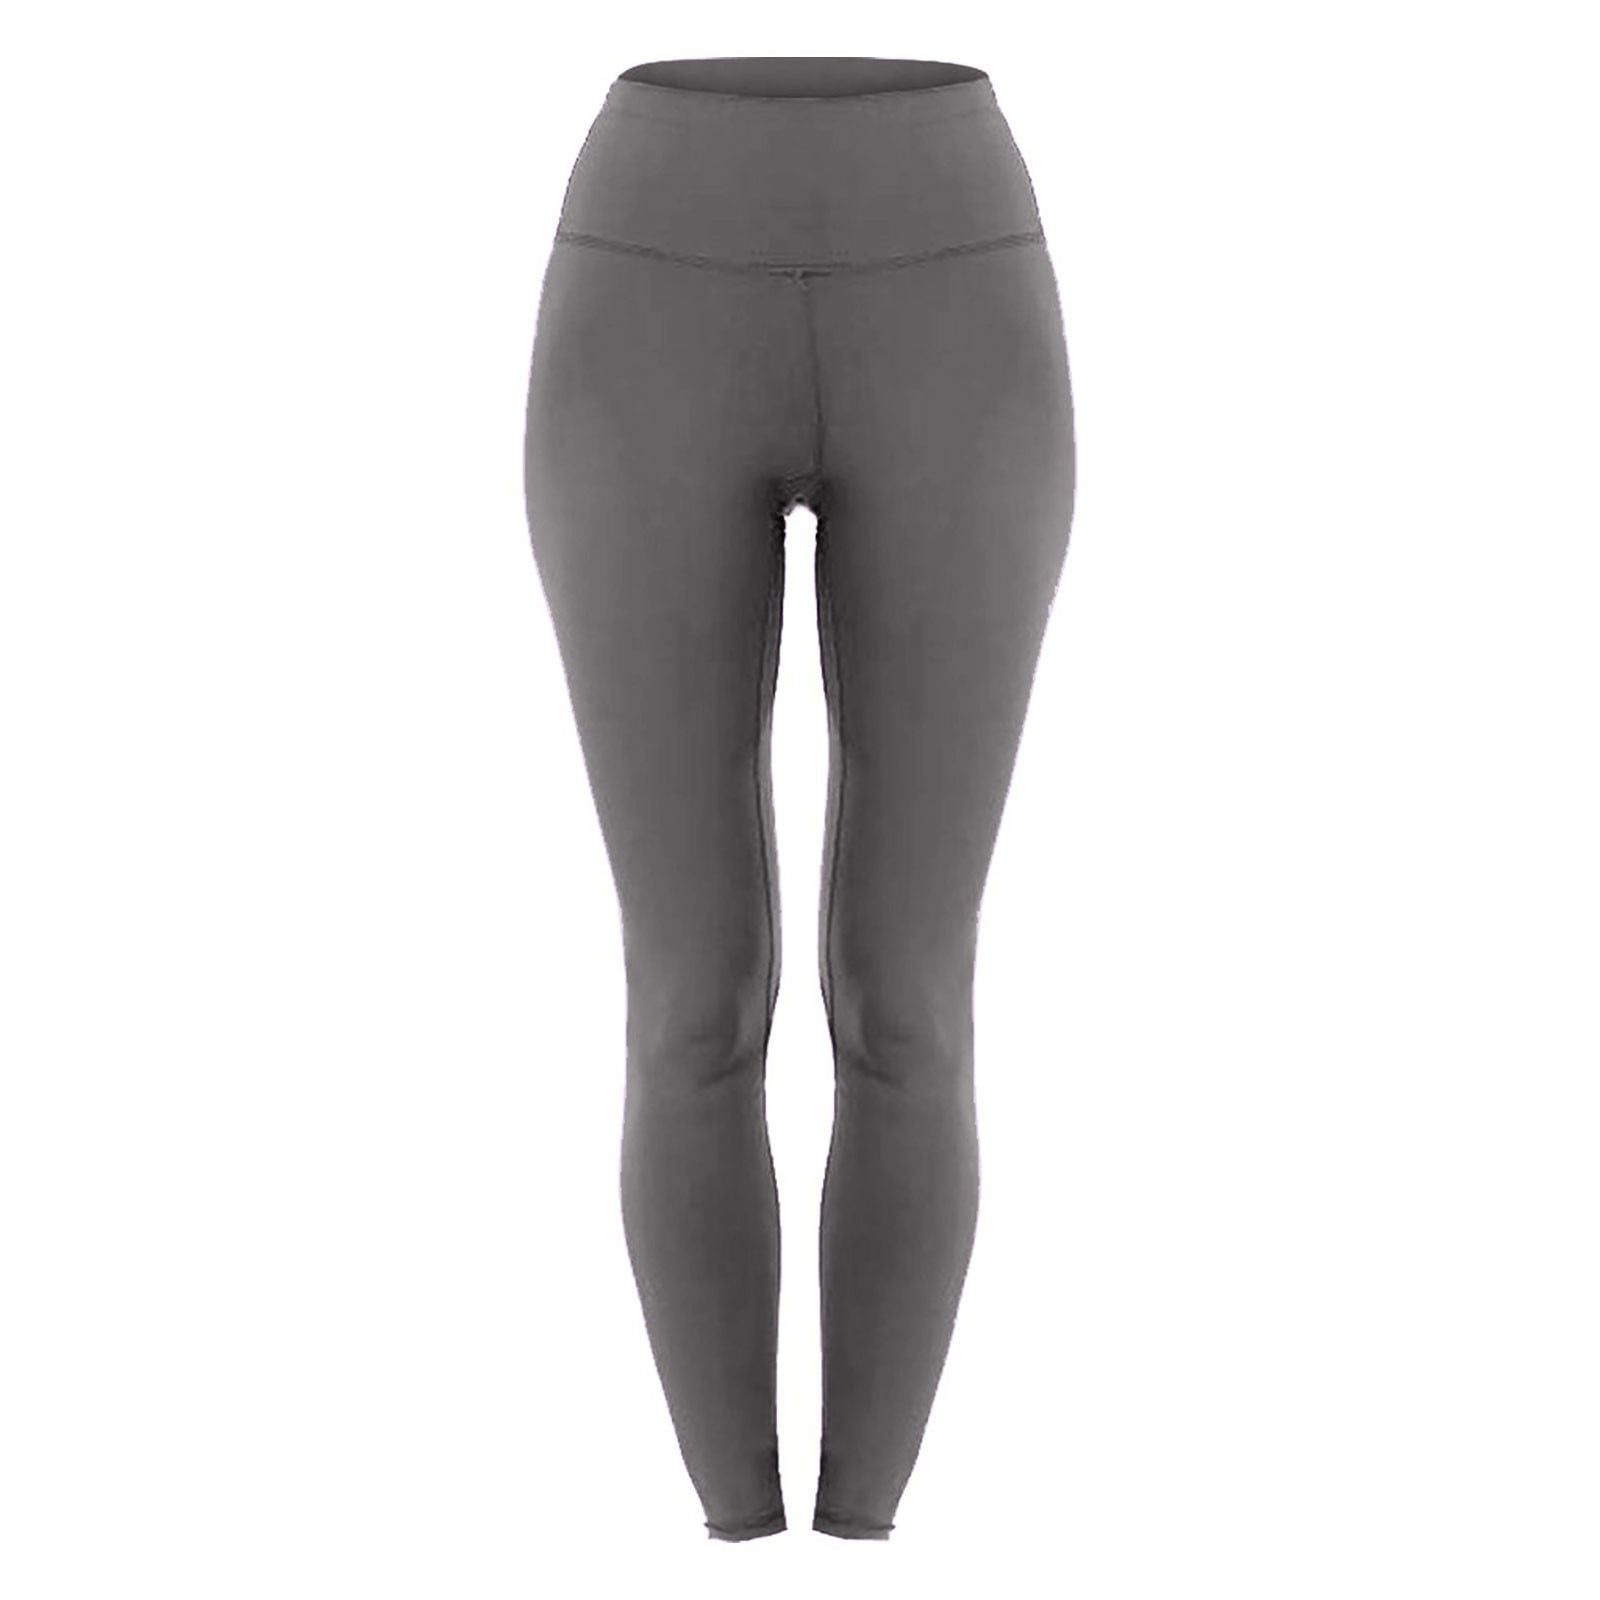 LL Womens High Waisted Flare Low Rise Yoga Pants Super Stretchy Workout  Leggings For Gym, Running, And Sports From Chanel40and42, $21.06